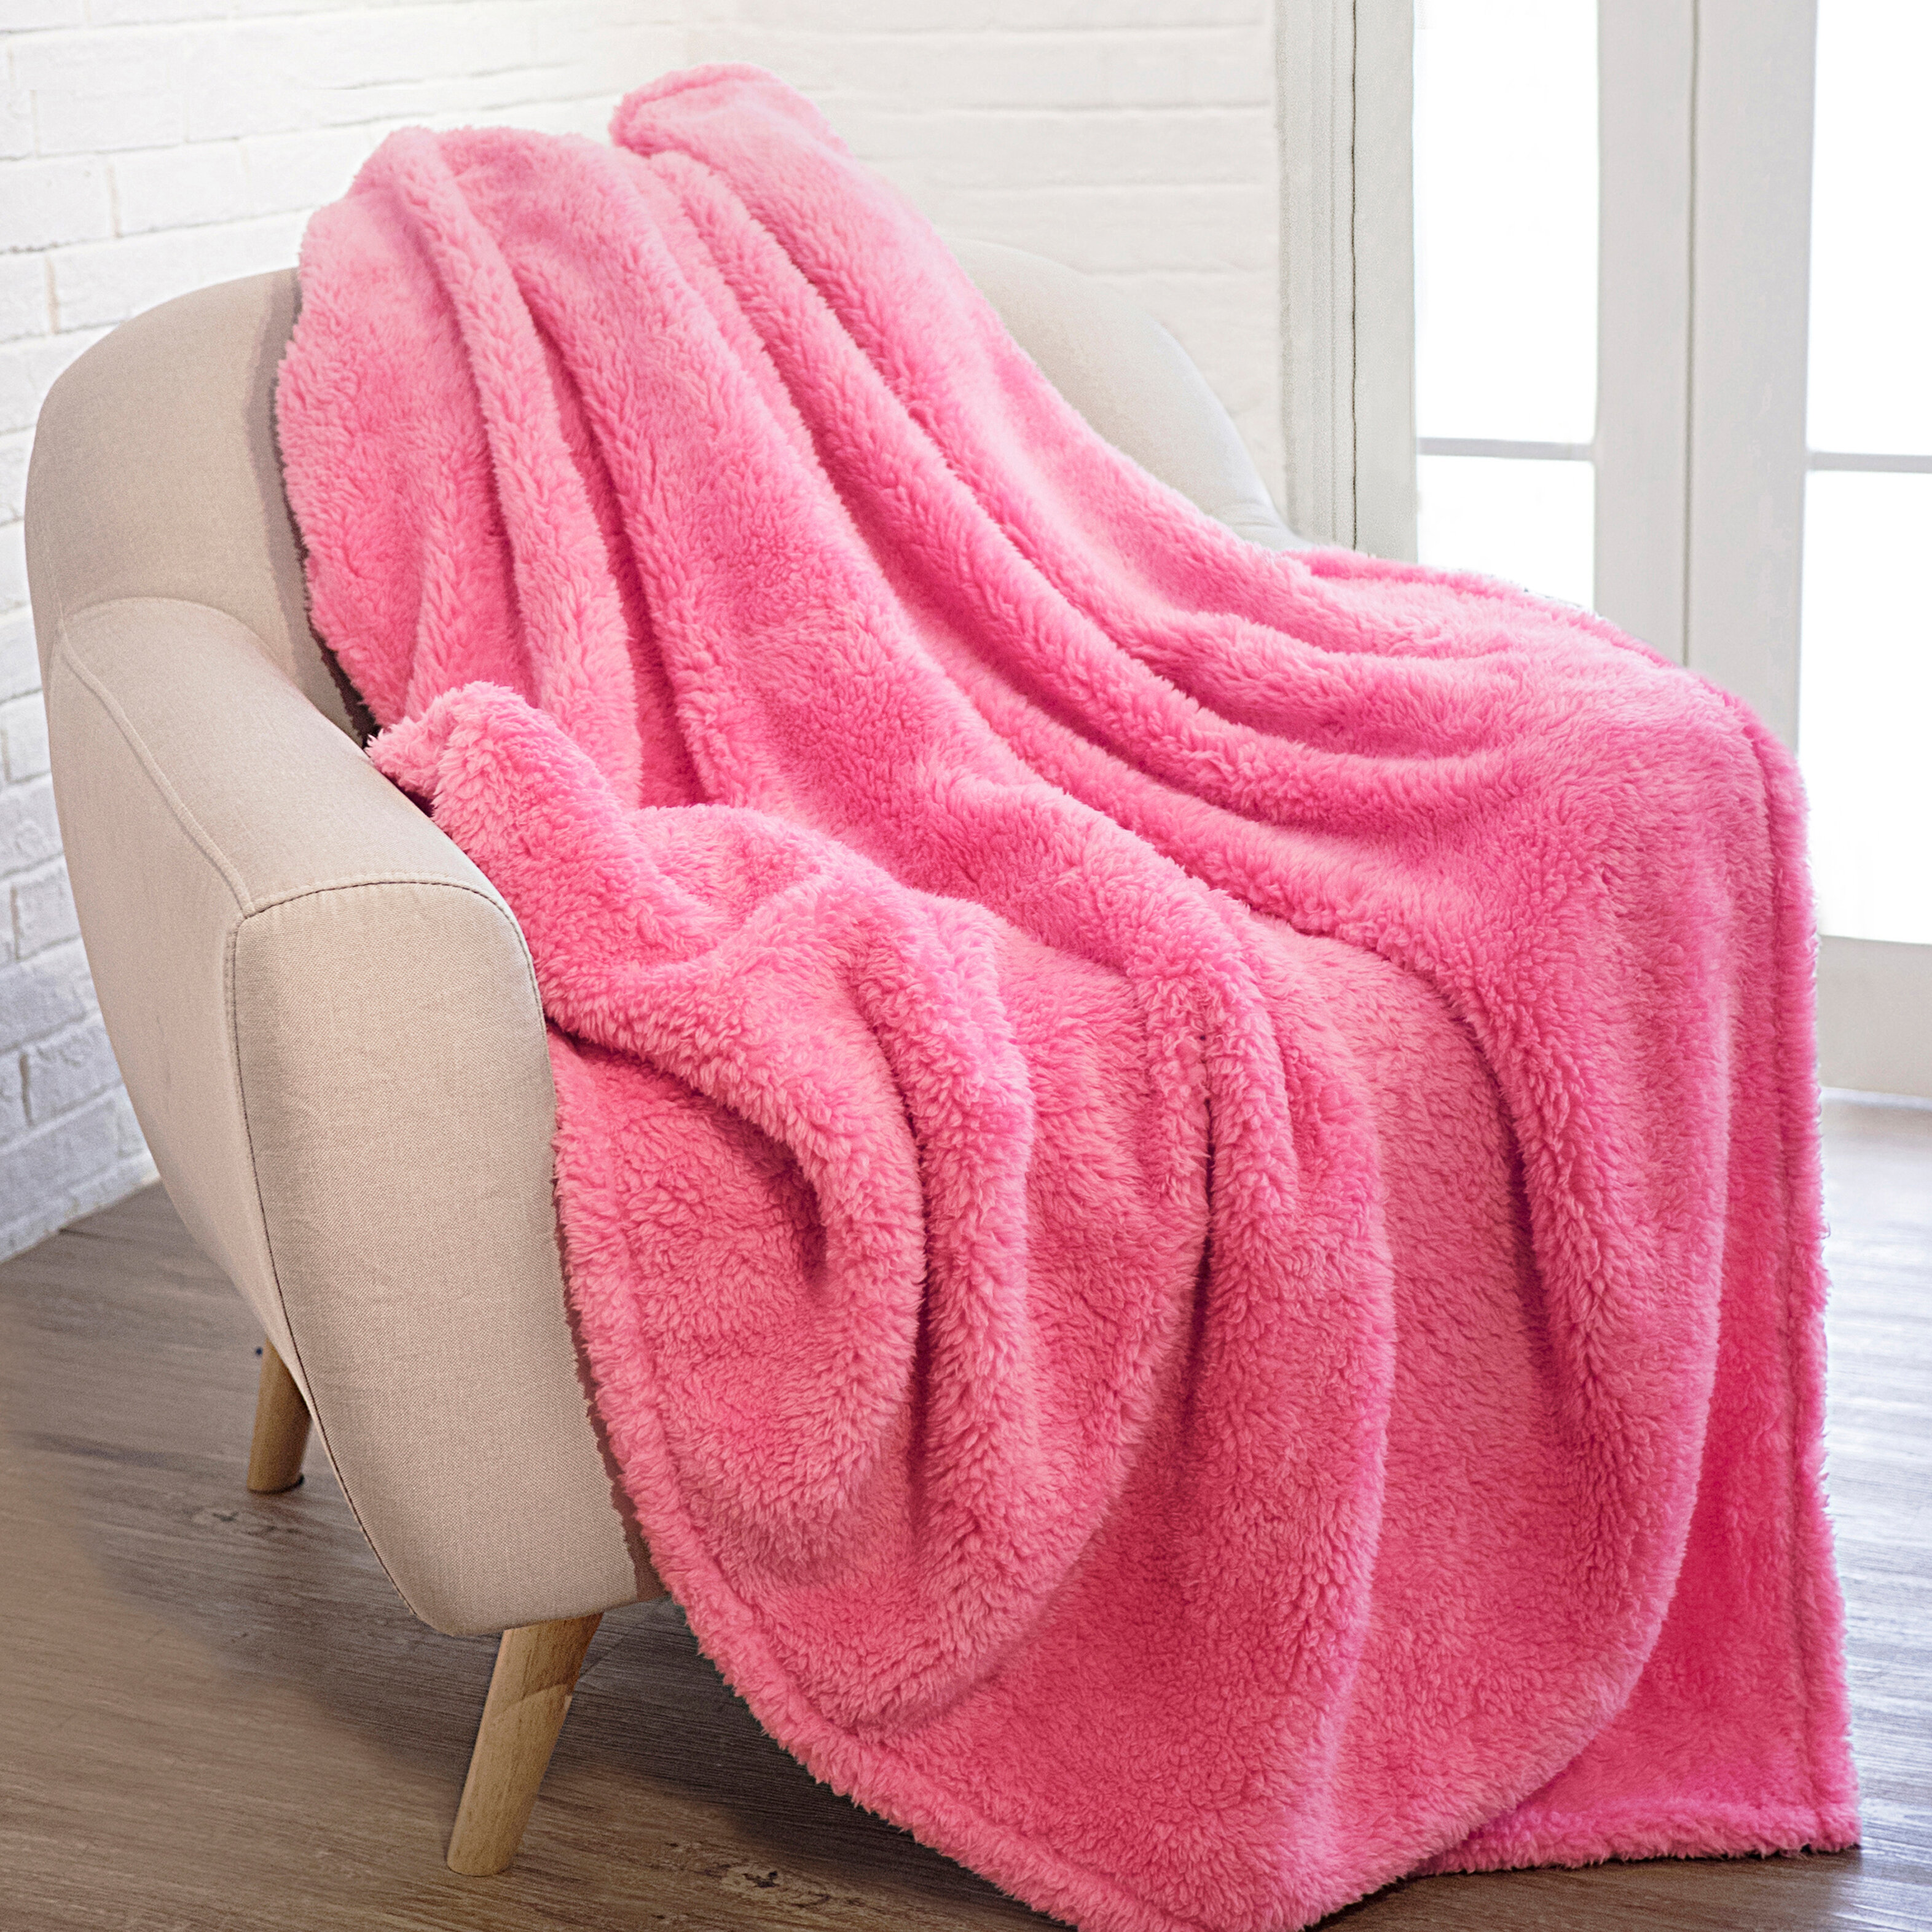 Pink Plush Blankets Throws Youll Love In 2021 Wayfair